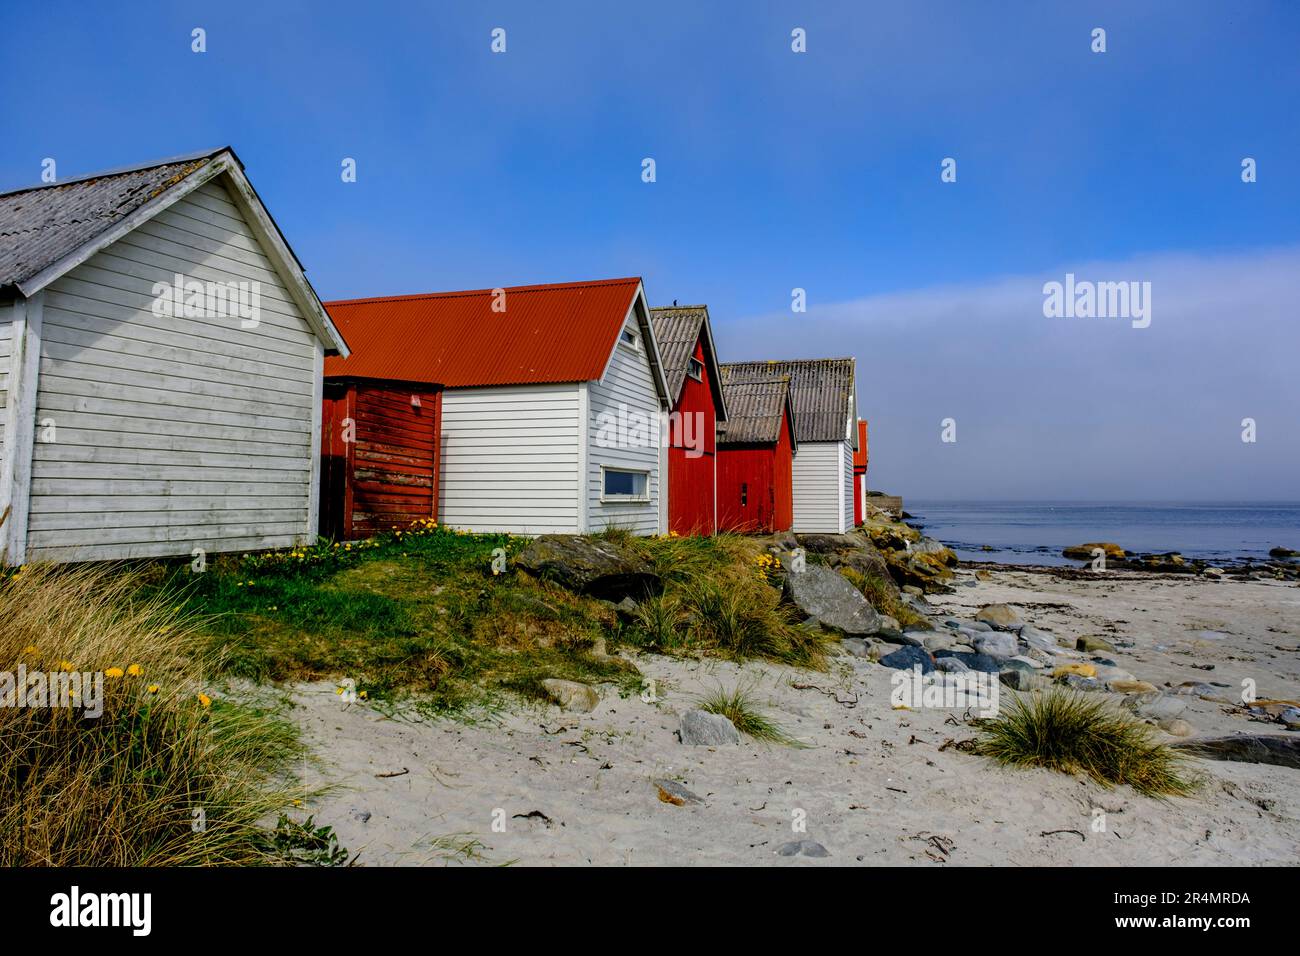 Olberg; Olbergstranden; Raege; Norway; May 20 2023, Row Or Line Of Traditional Colourful Beach Huts Against A Clear Early Morning BLue Sky With No Peo Stock Photo